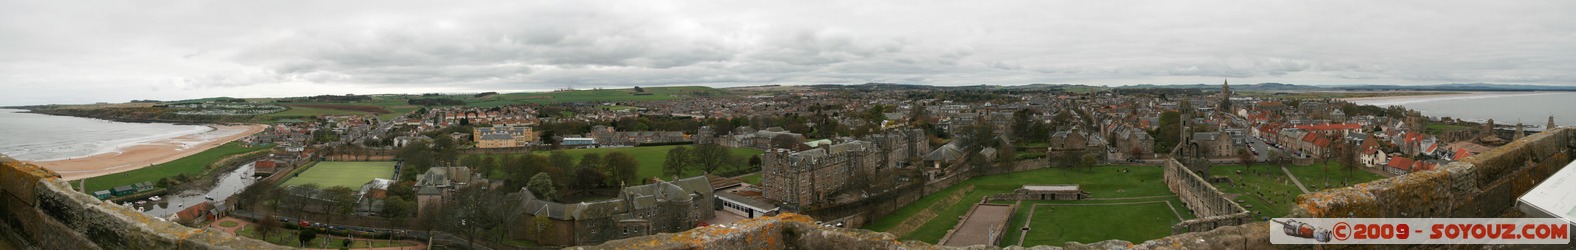 St Andrews Cathedral - View from St Rule's Tower - panorama
The Pends, Fife KY16 9, UK
Mots-clés: Moyen-age panorama